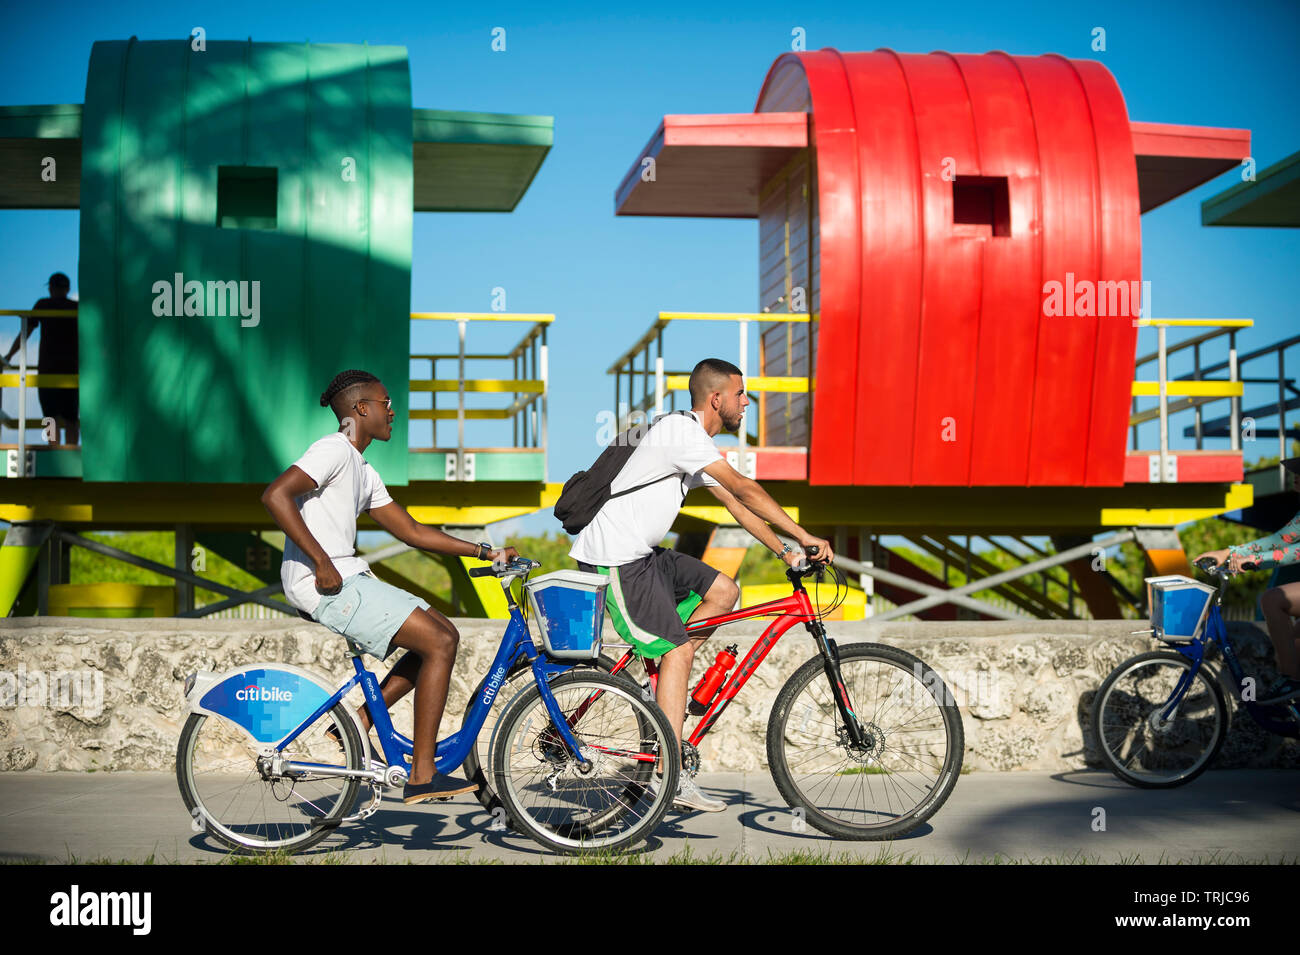 MIAMI - JULY 2017: Tourists using CitiBike bicycle share system ride along the promenade in South Beach in front of a row of colorful lifeguard towers. Stock Photo